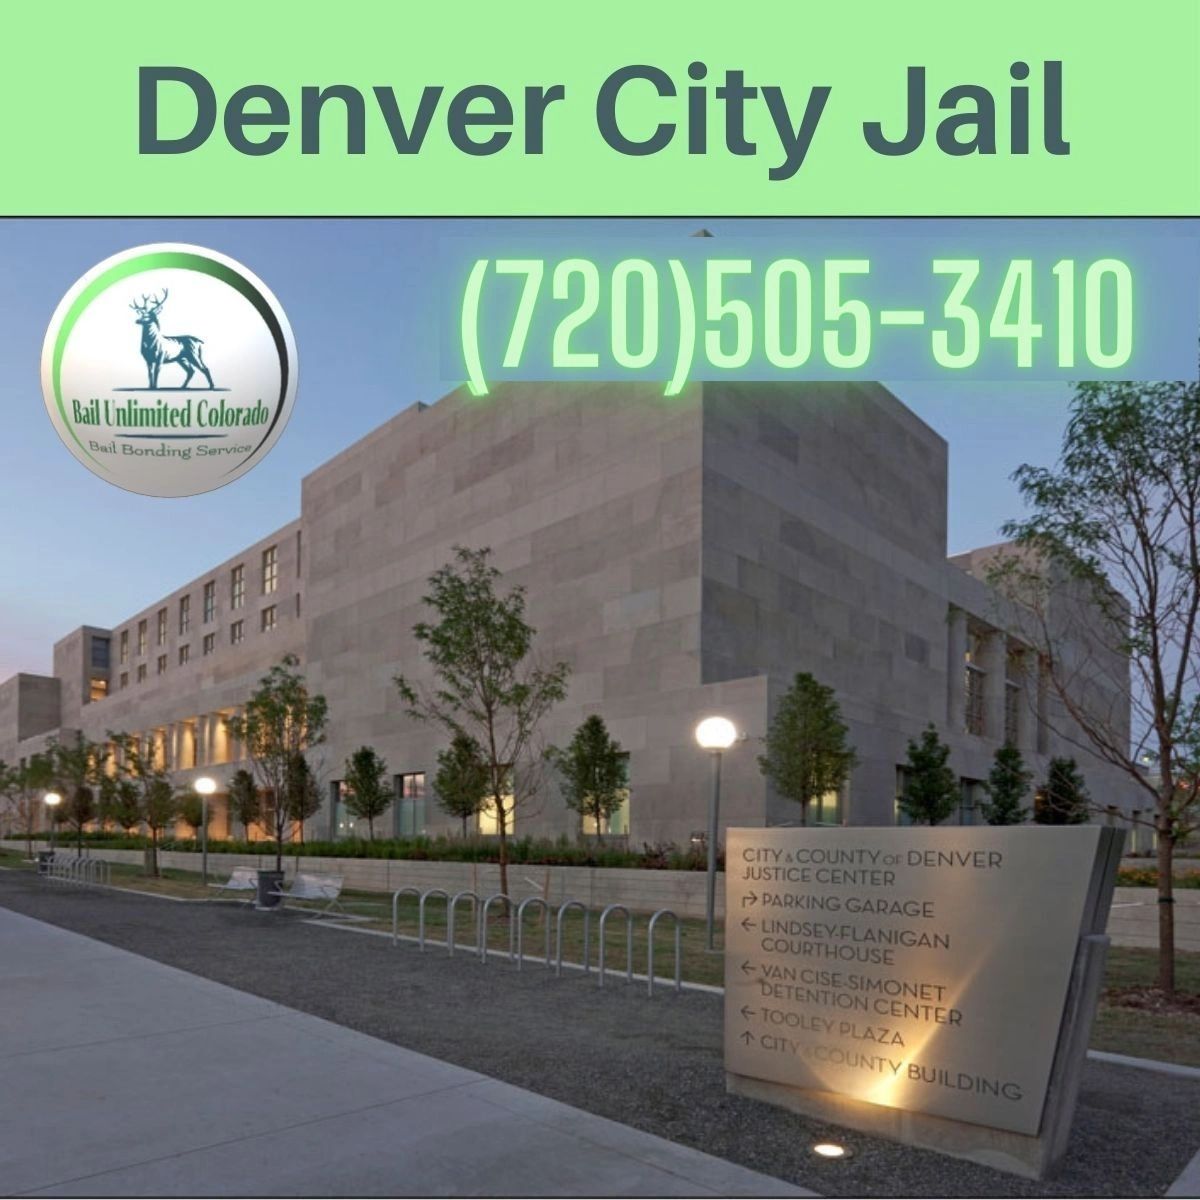 Denver City Jail Bail Unlimited Colorado (720) 505-3410 City and County of Denver Justice Center.